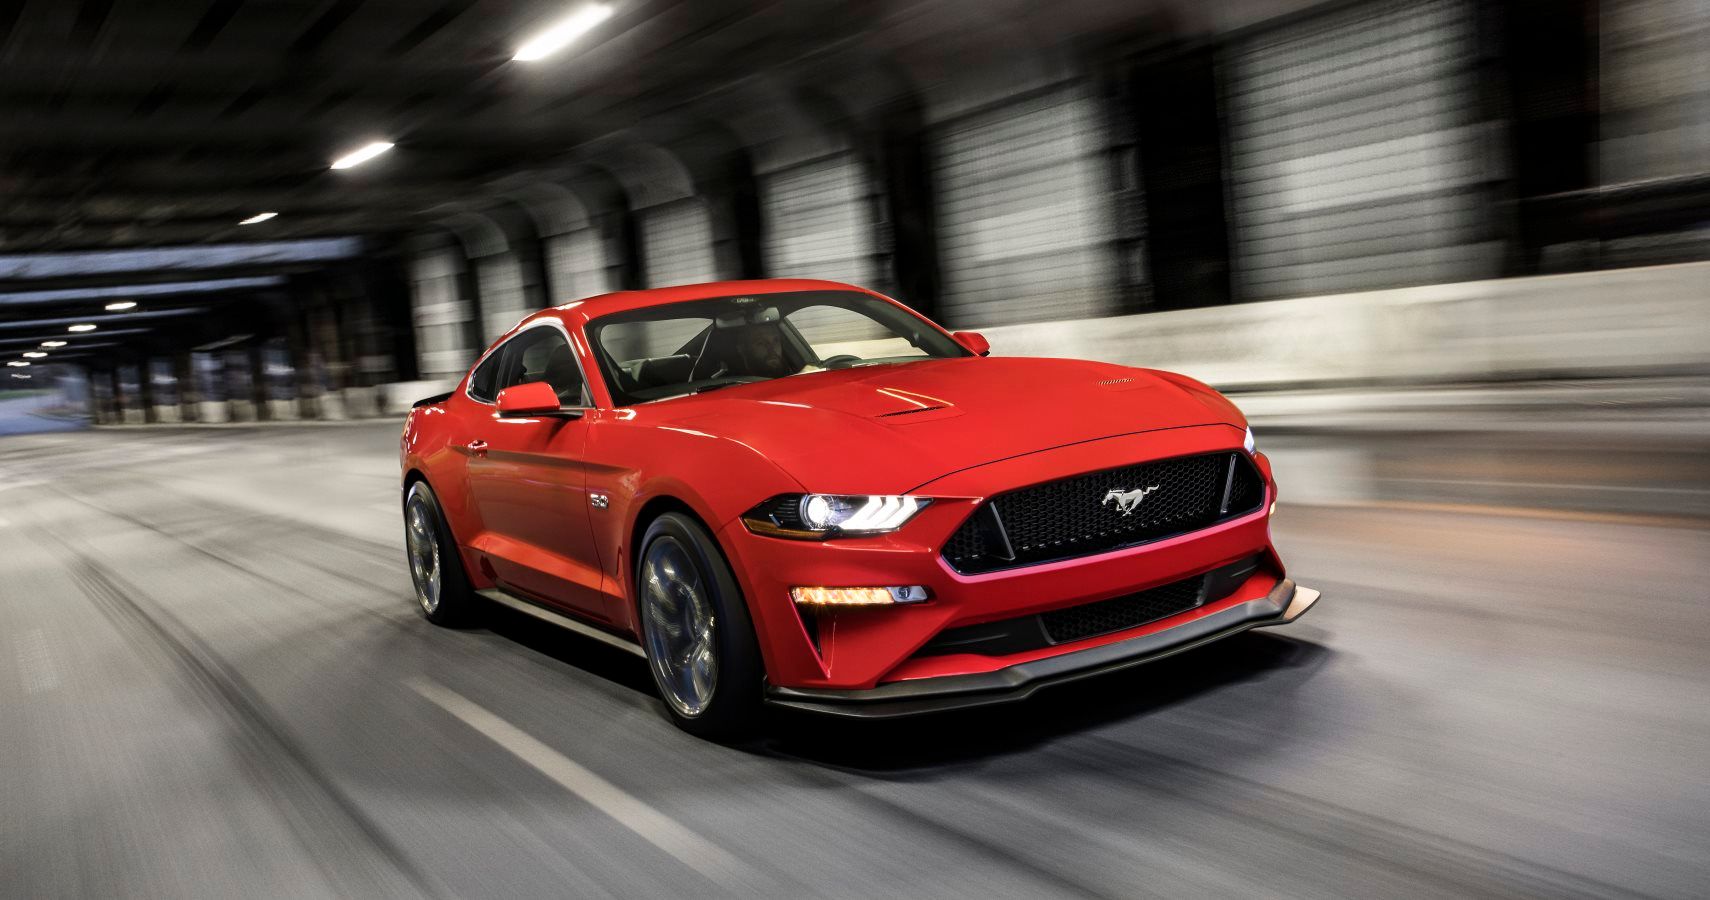 Mustang GT Gets Official Supercharger Kit From Ford With Insane Power